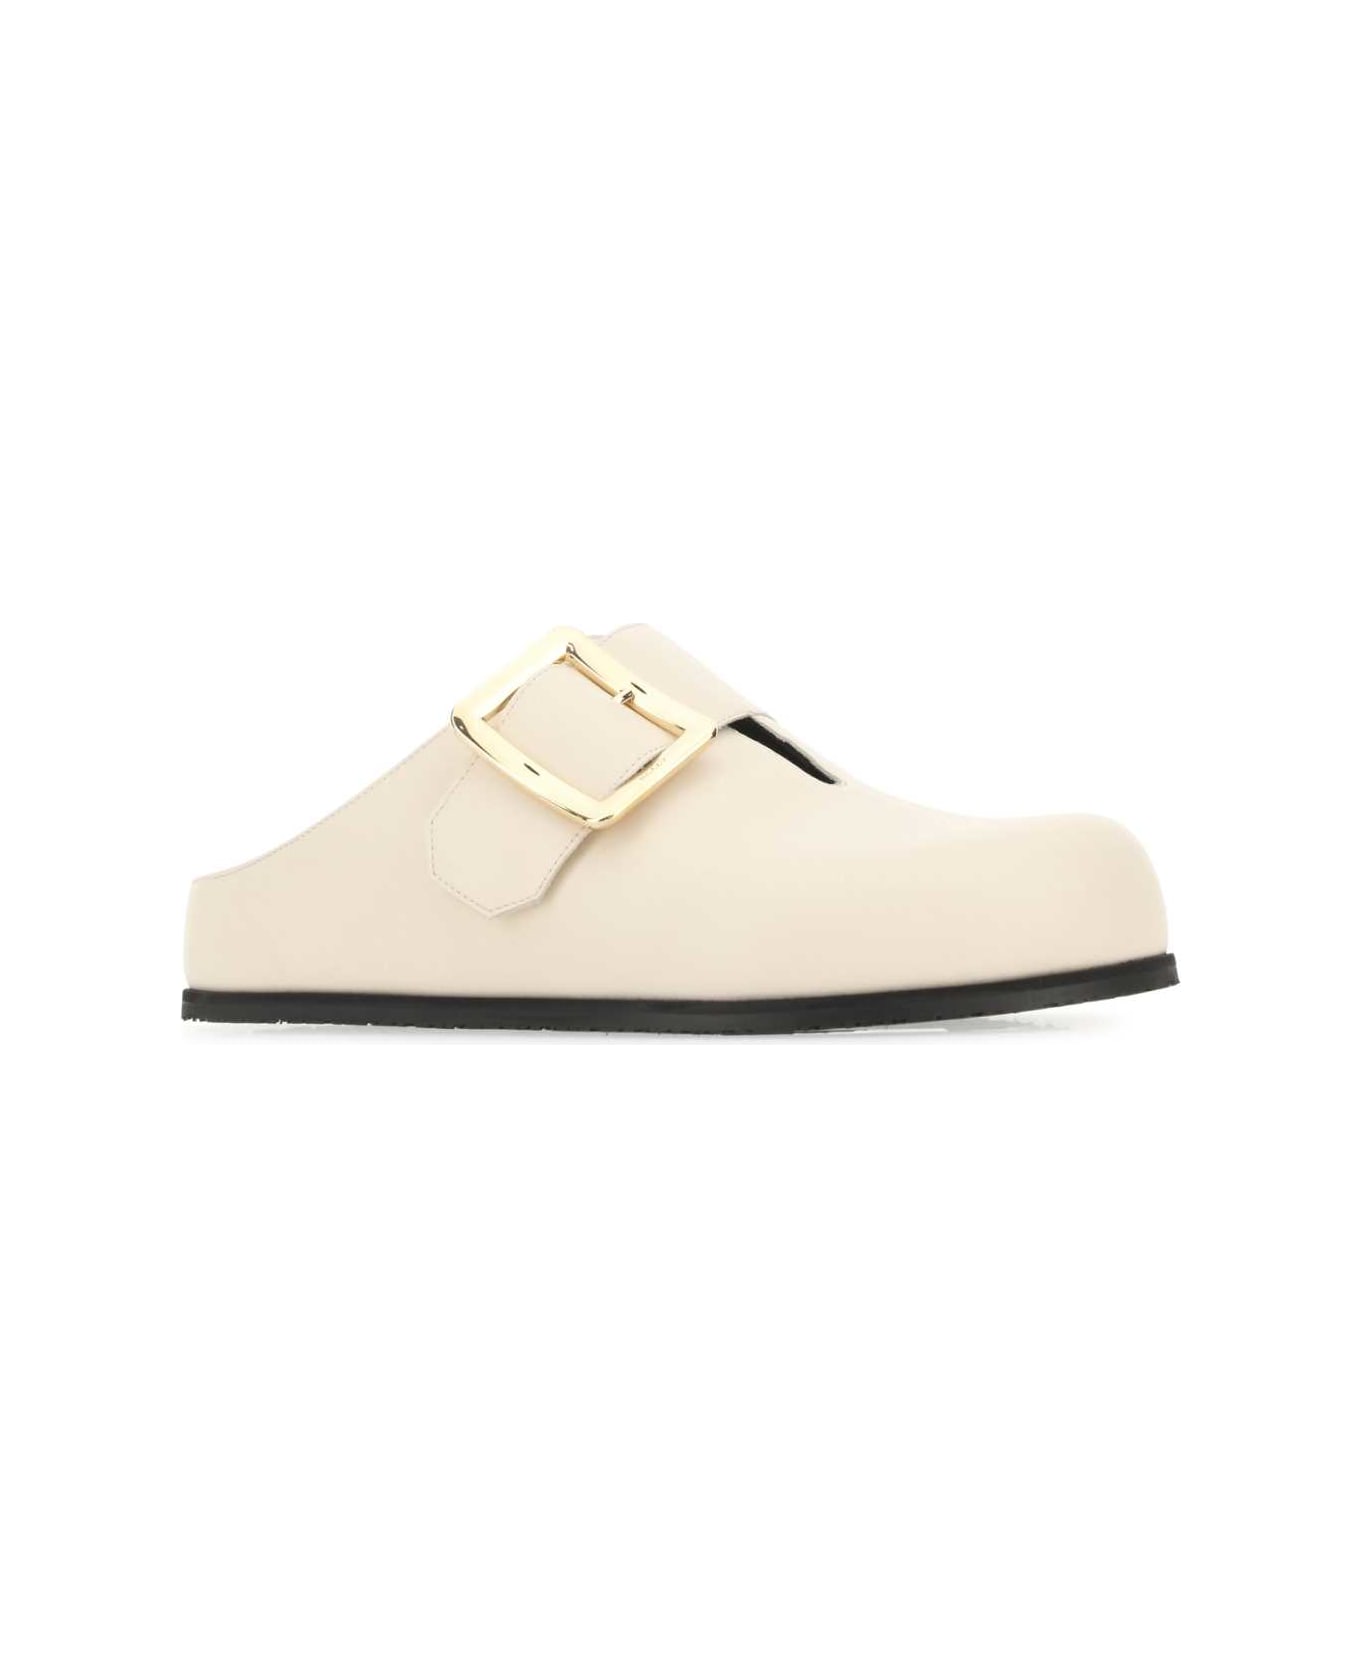 Bally Ivory Leather Lulu Slippers - Multicolor